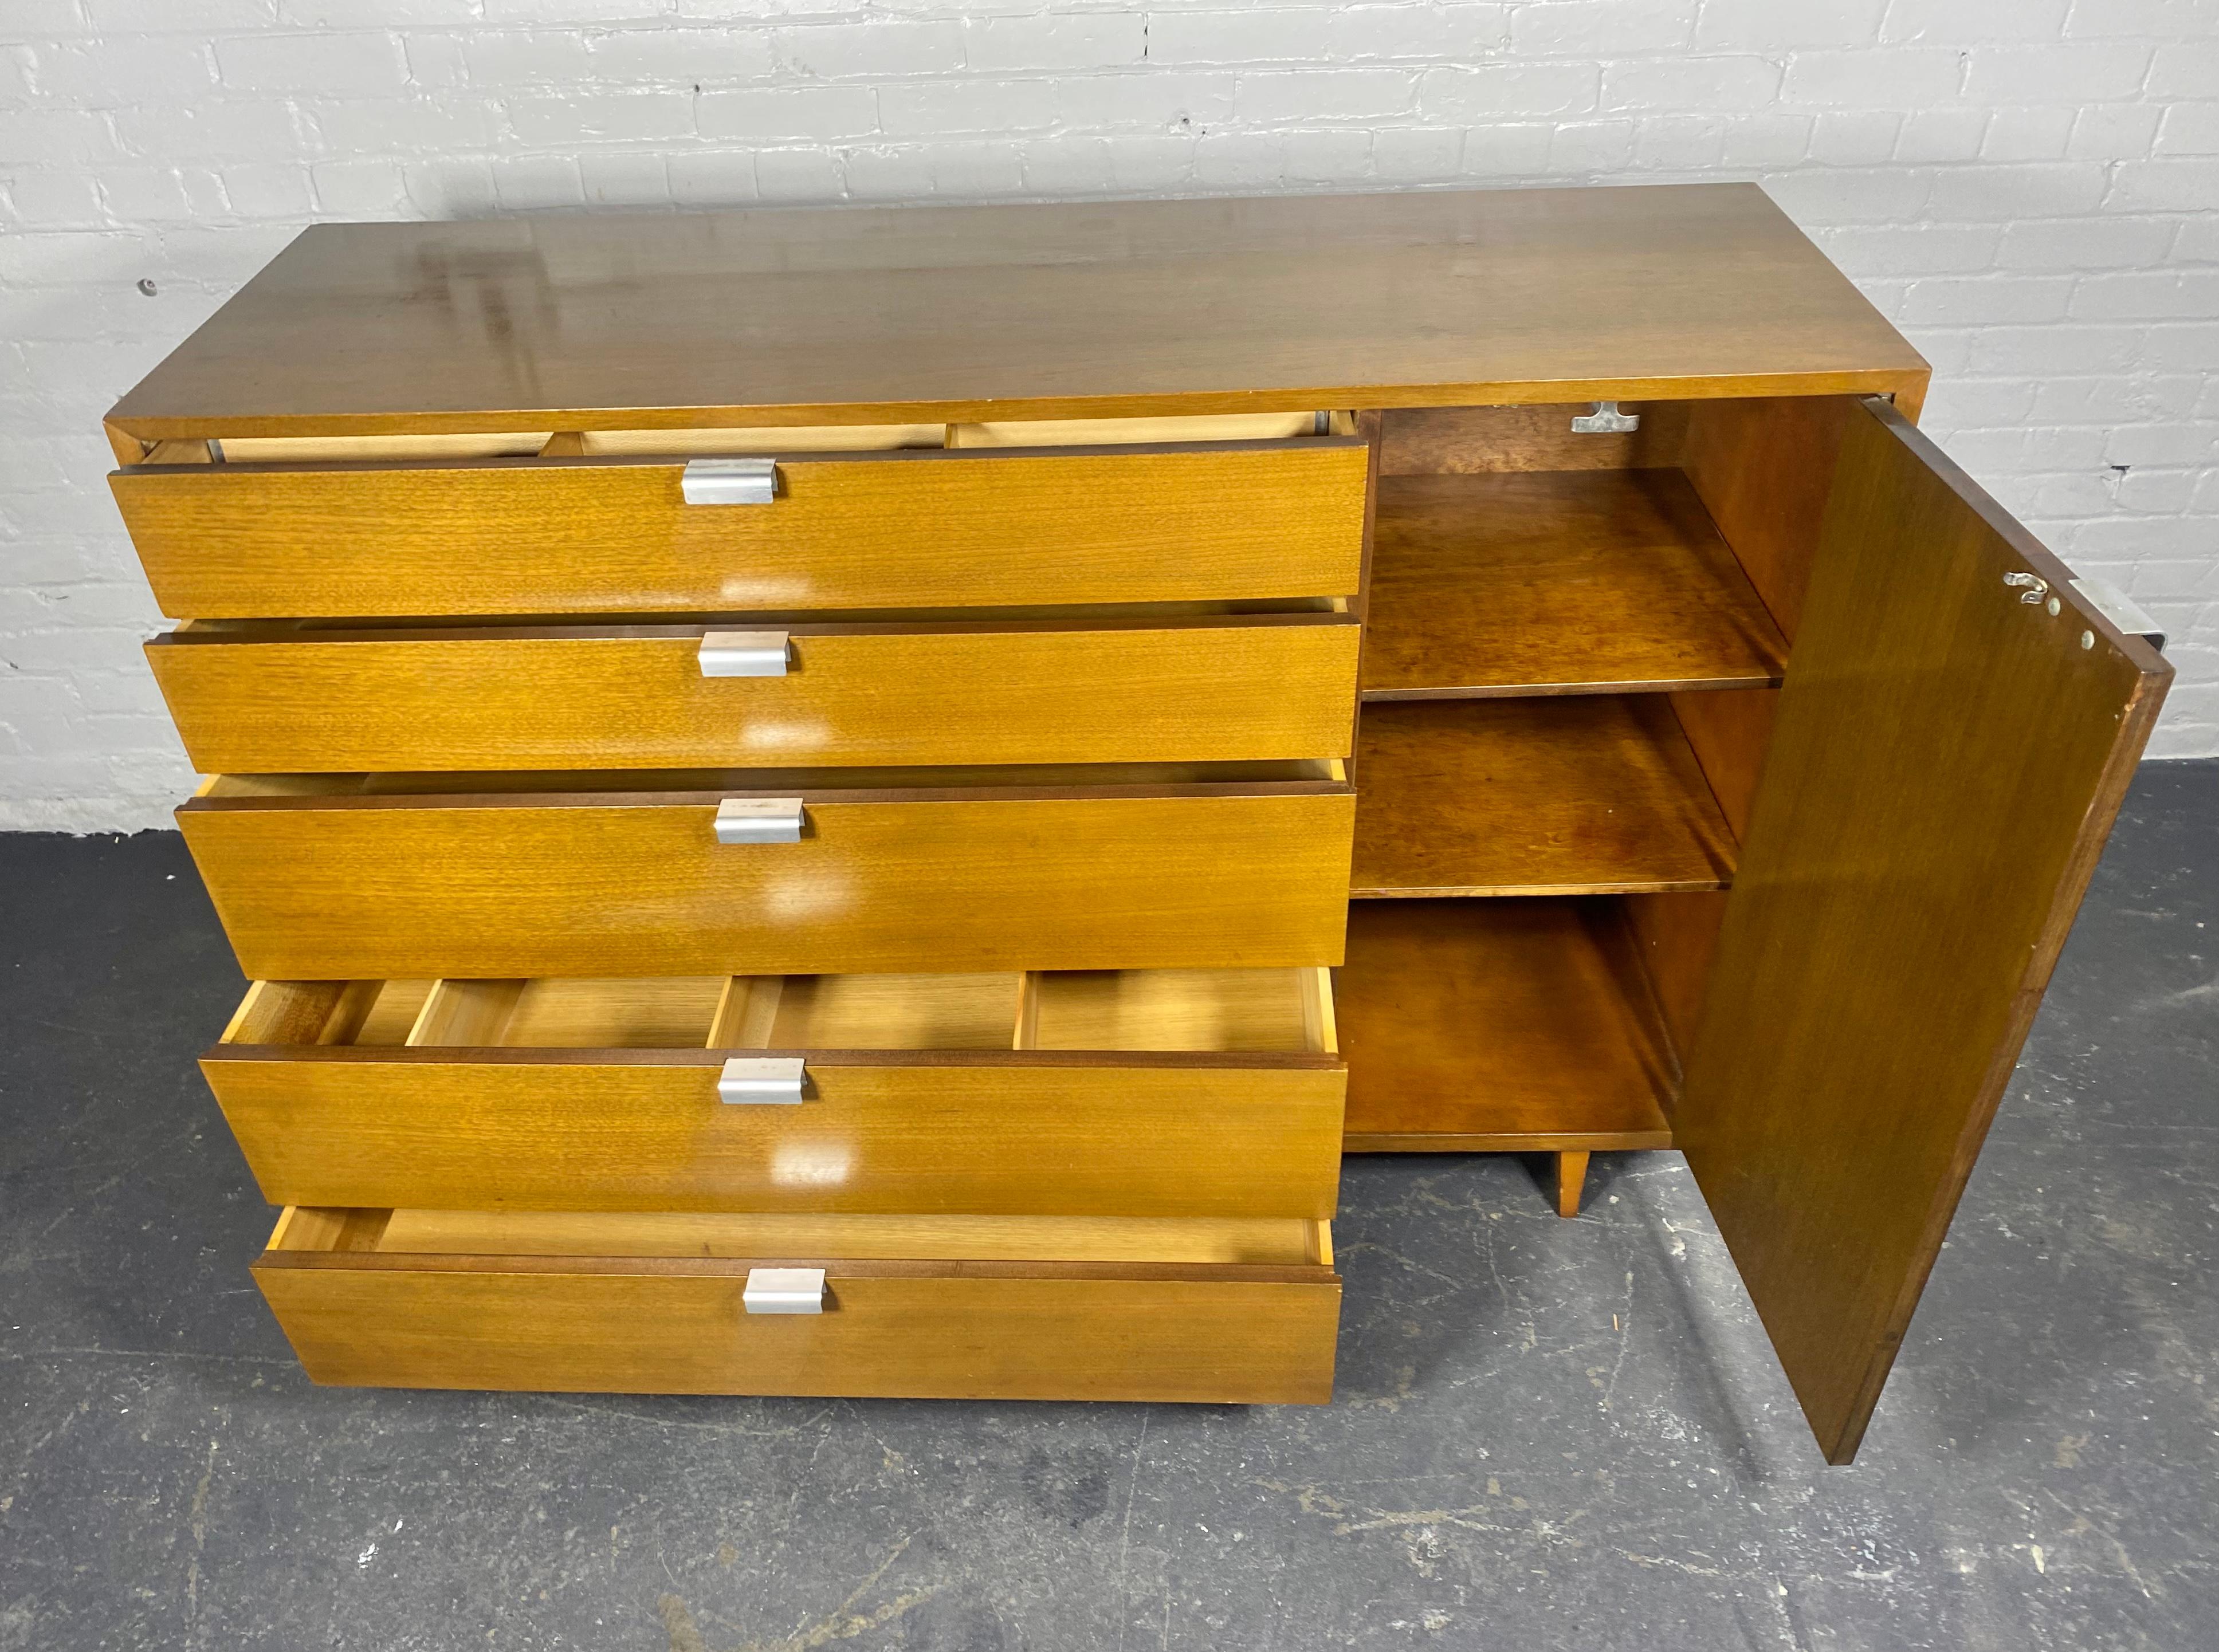 Nice early George Nelson 'Thin Edge' chest of drawers with classic aluminum pulls  and walnut or mahogany veneer. Divided drawers,,, Produced in the  1950s & 1960s by Herman Miller, the cabinet and drawers retain its original condition.. nice warm